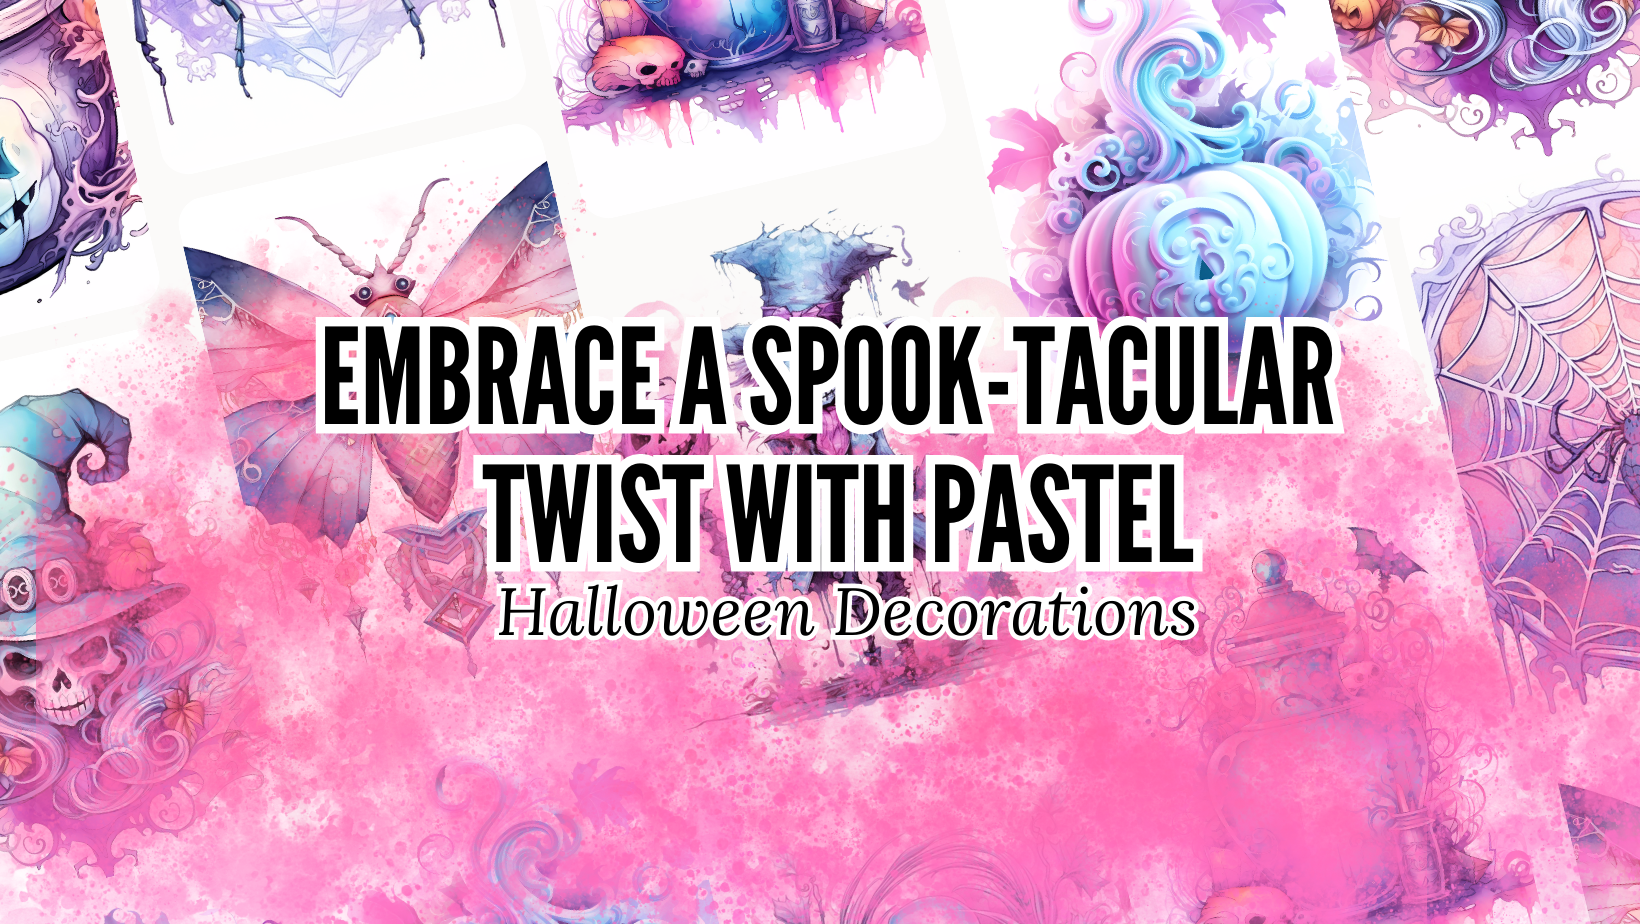 From Fright to Delight: How Pastel Colors are Revolutionizing Halloween Decor